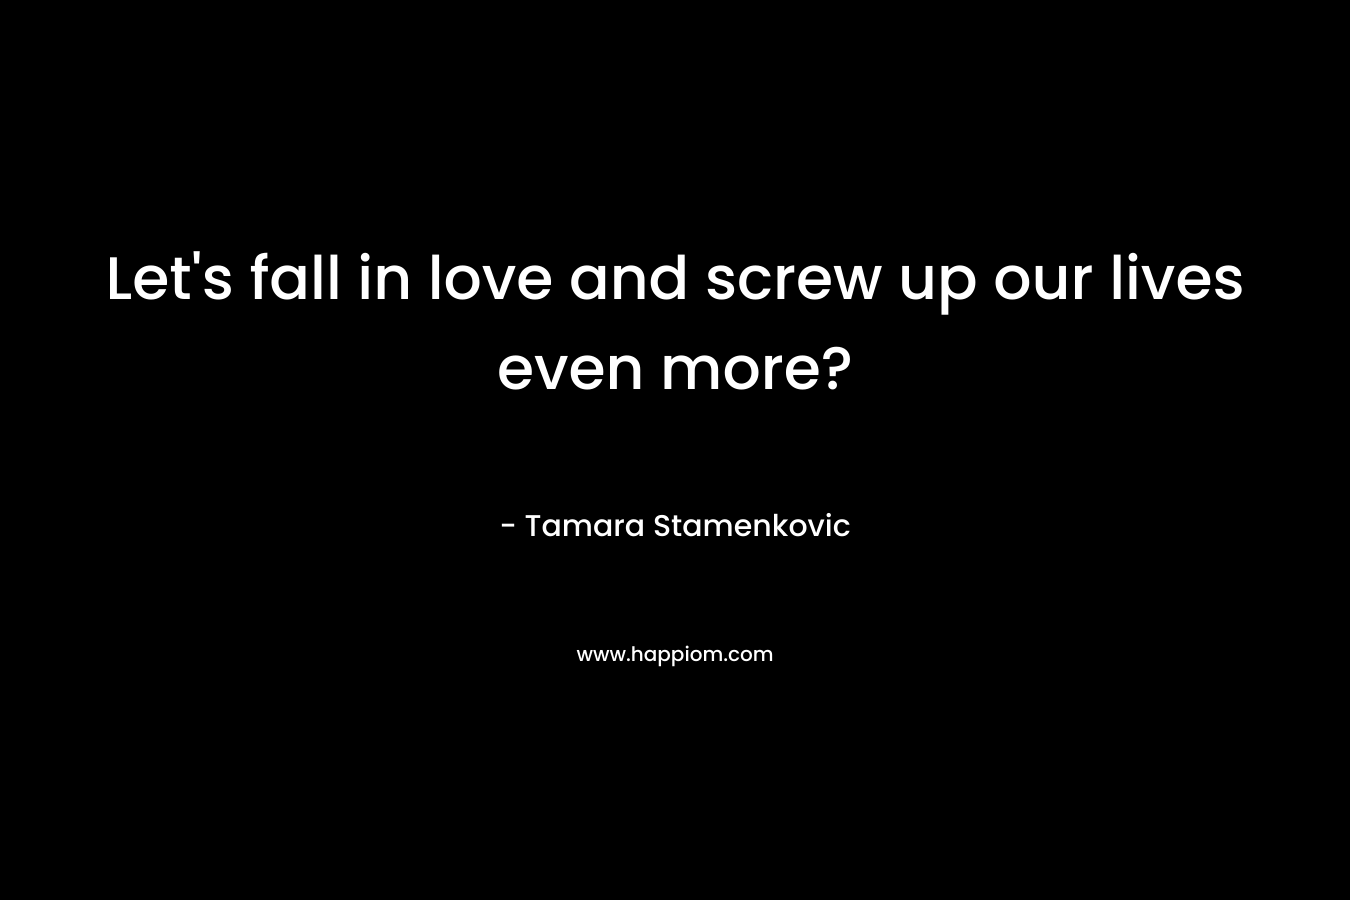 Let’s fall in love and screw up our lives even more? – Tamara Stamenkovic